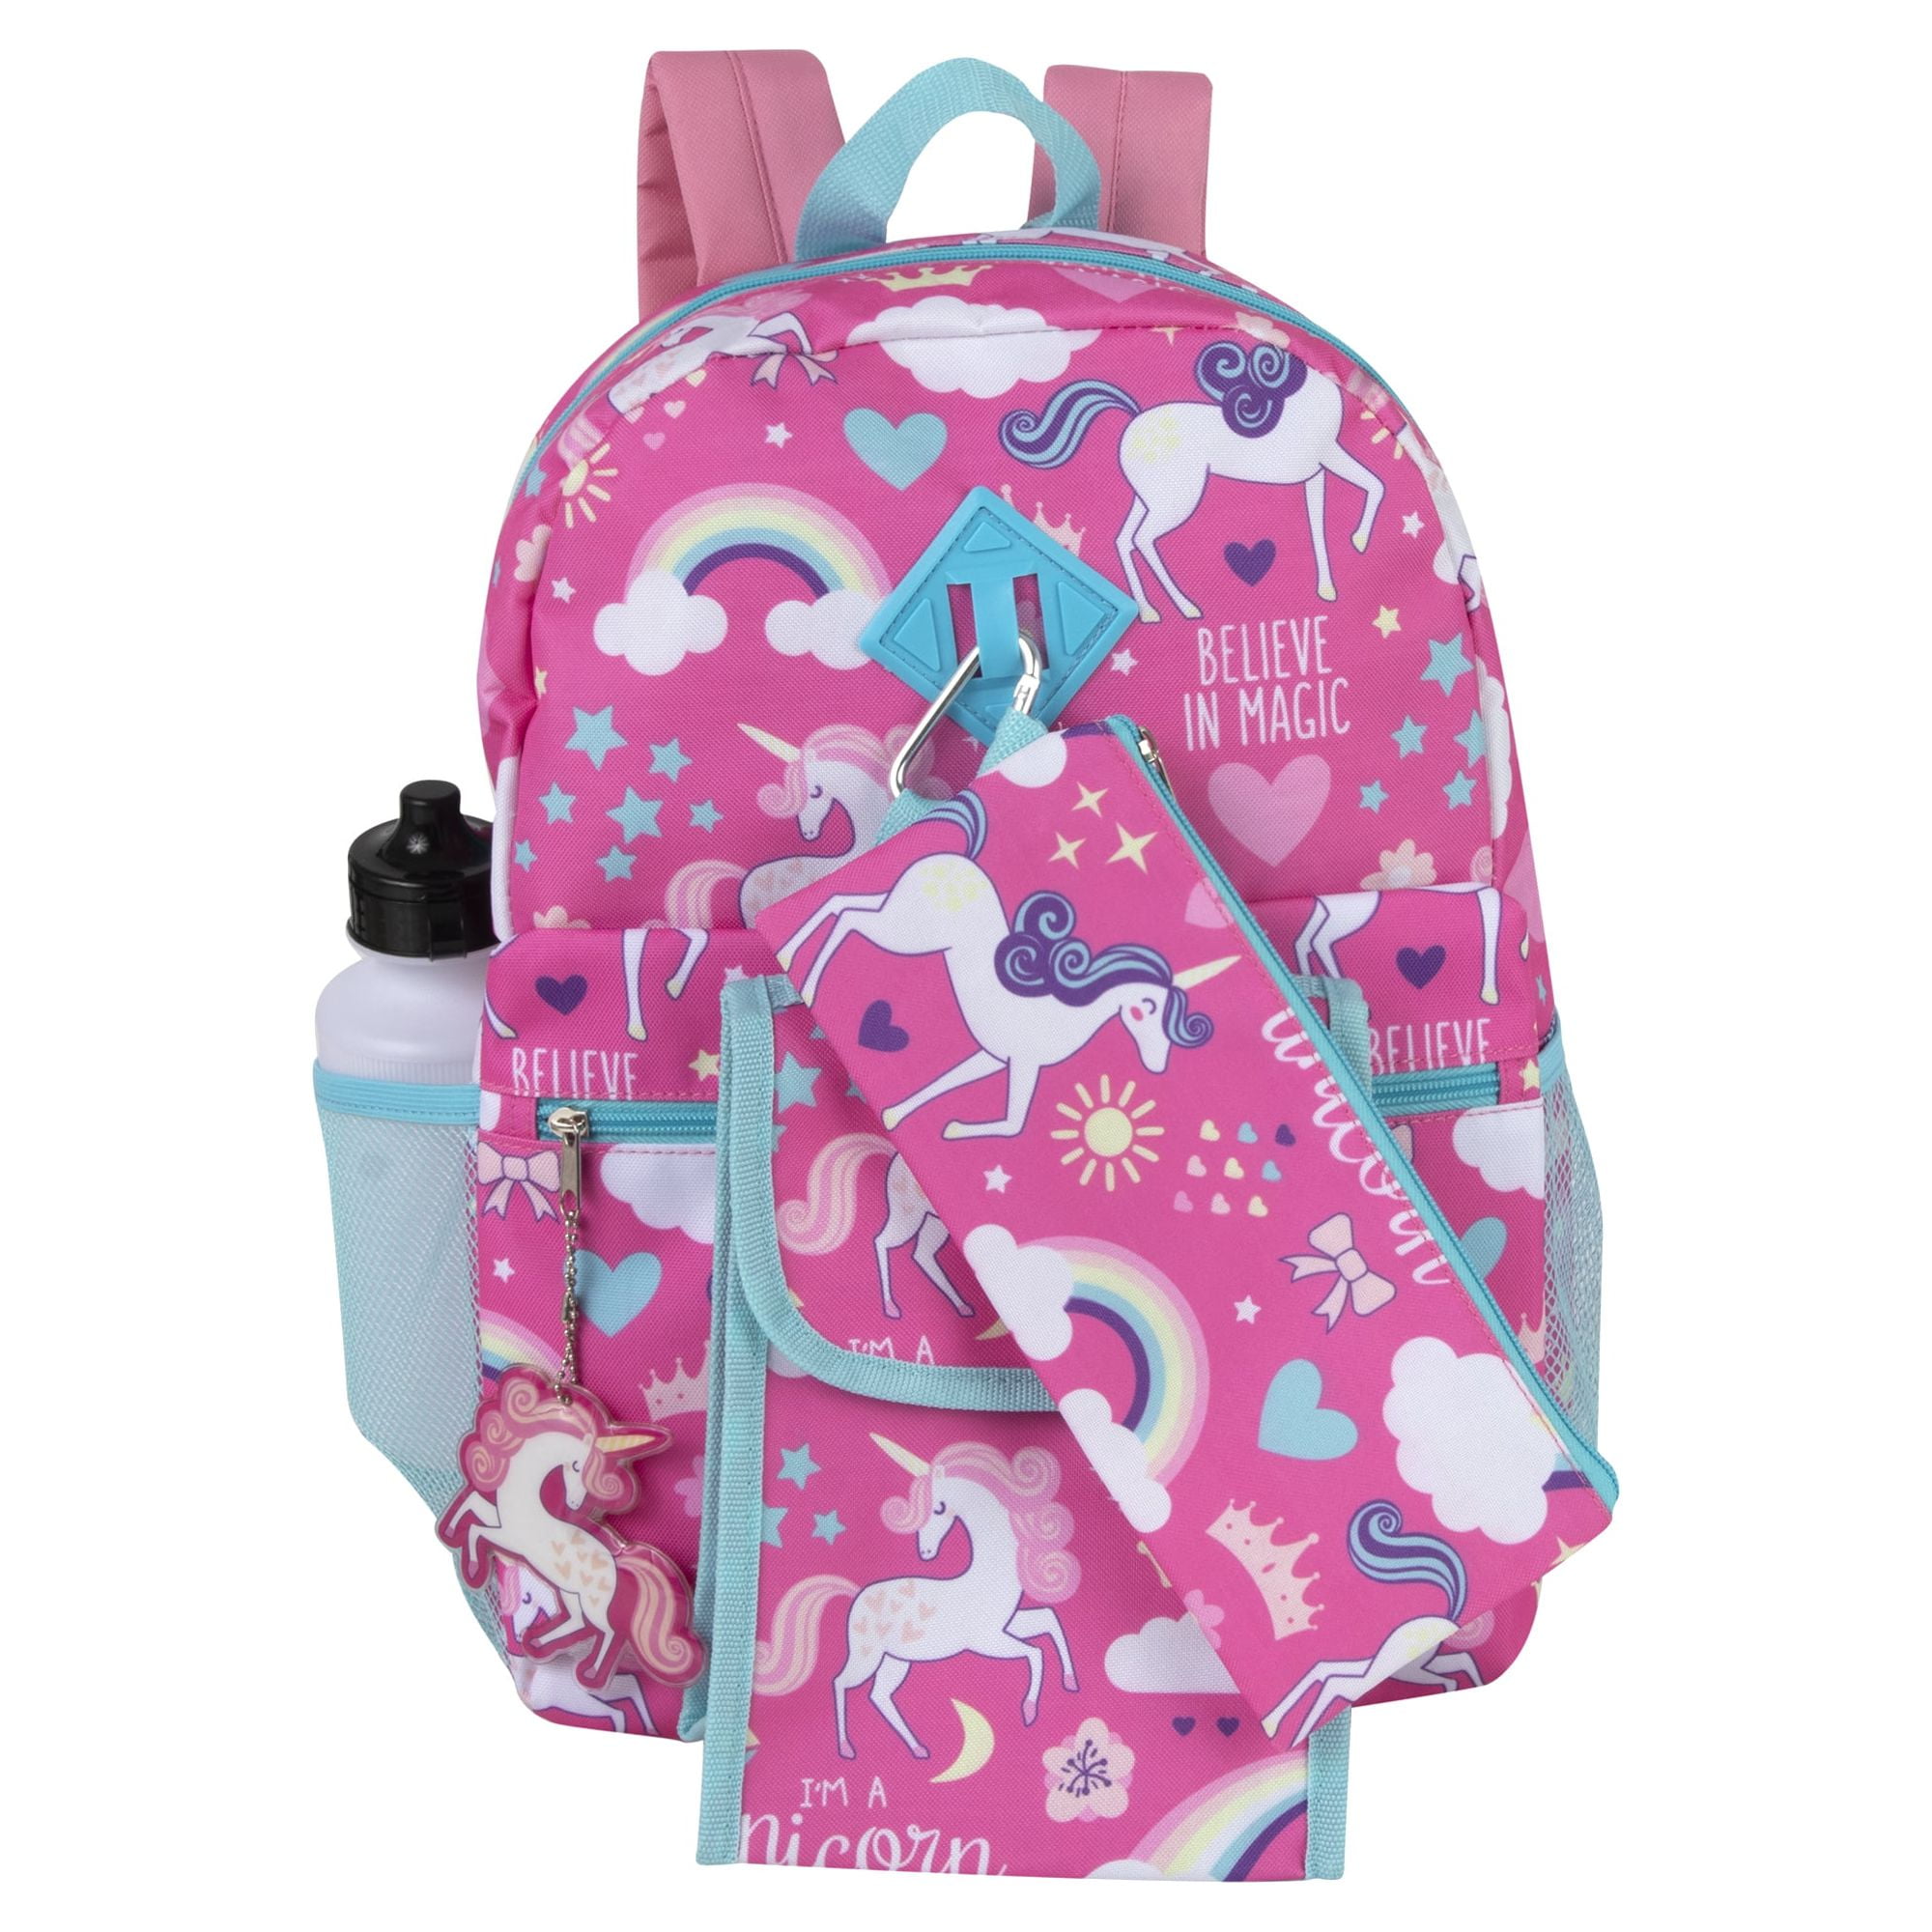 Custom Unicorn Lunch Bag for Girls - Grace and Lucille